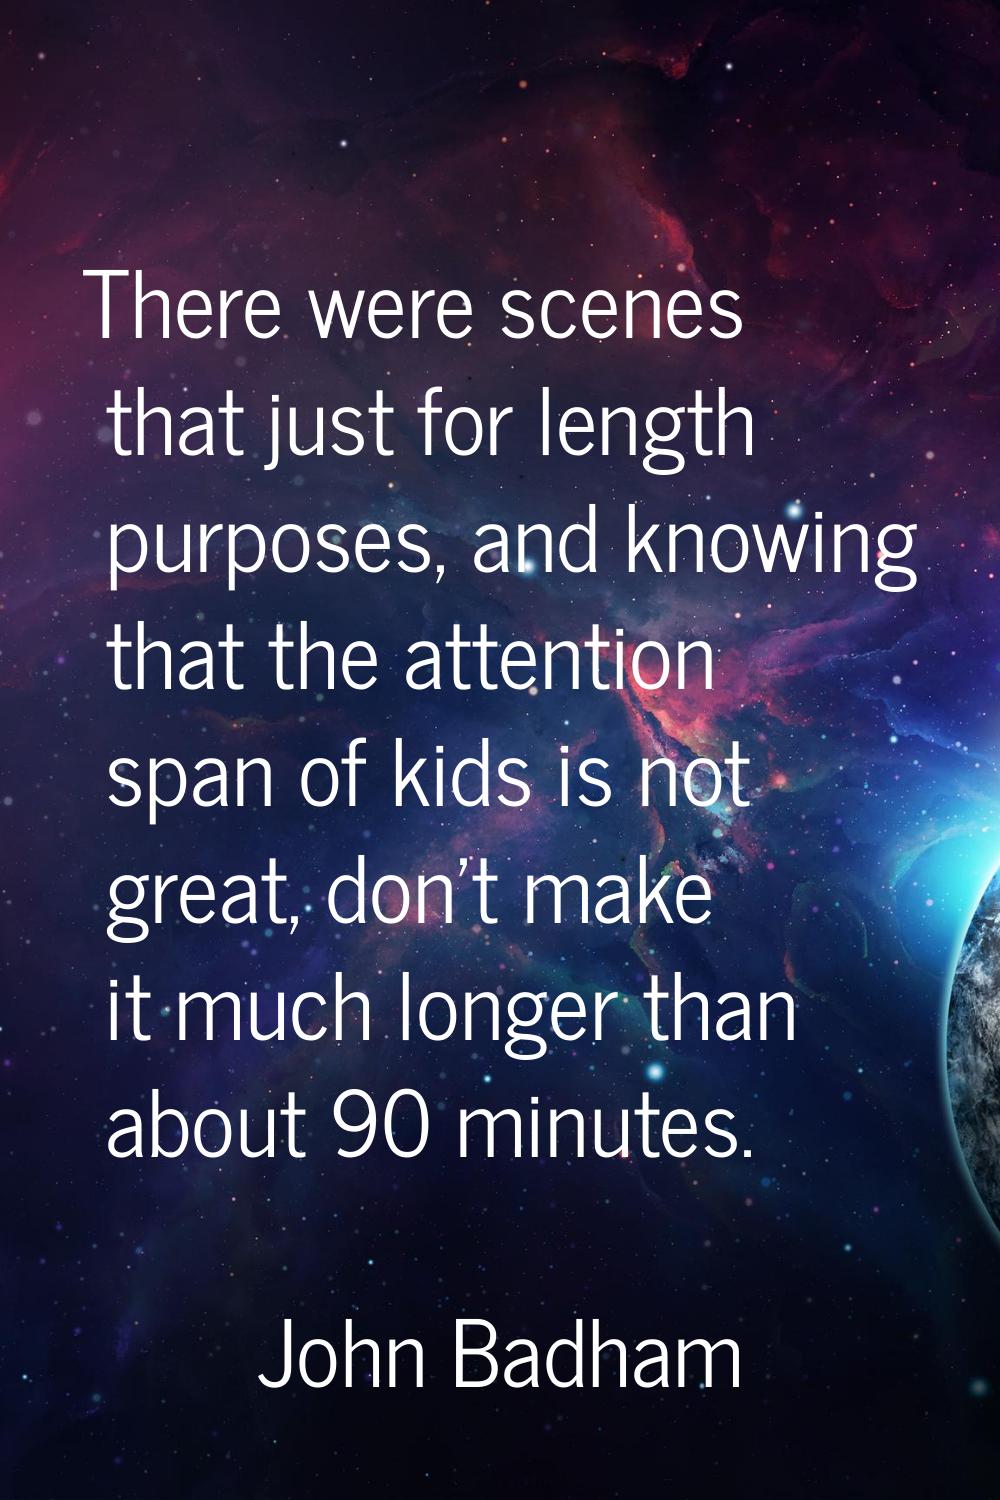 There were scenes that just for length purposes, and knowing that the attention span of kids is not